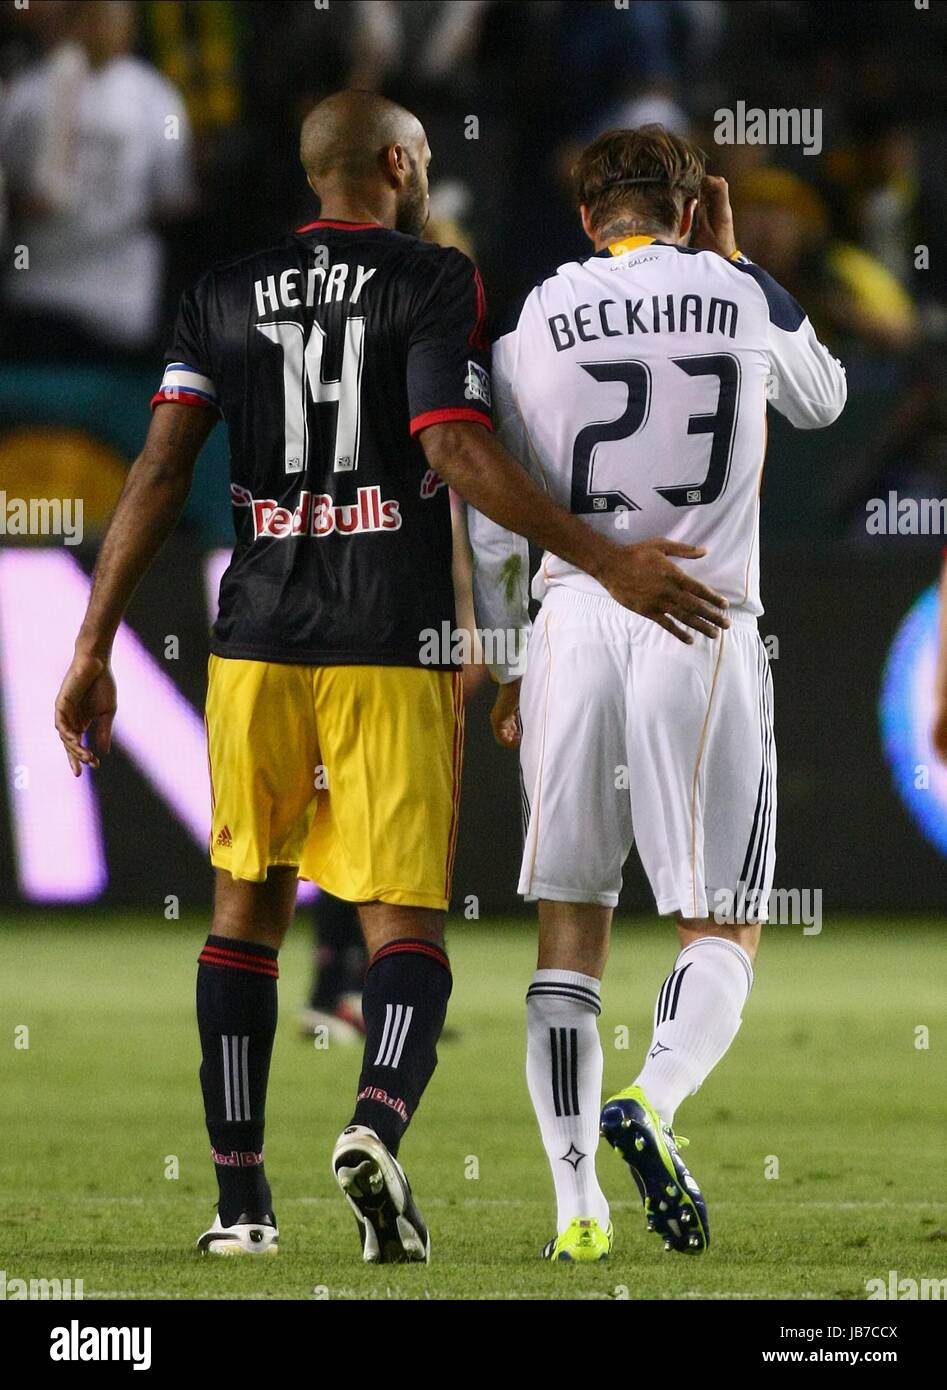 Thierry Henry of the New York Red Bulls and David Beckham of the